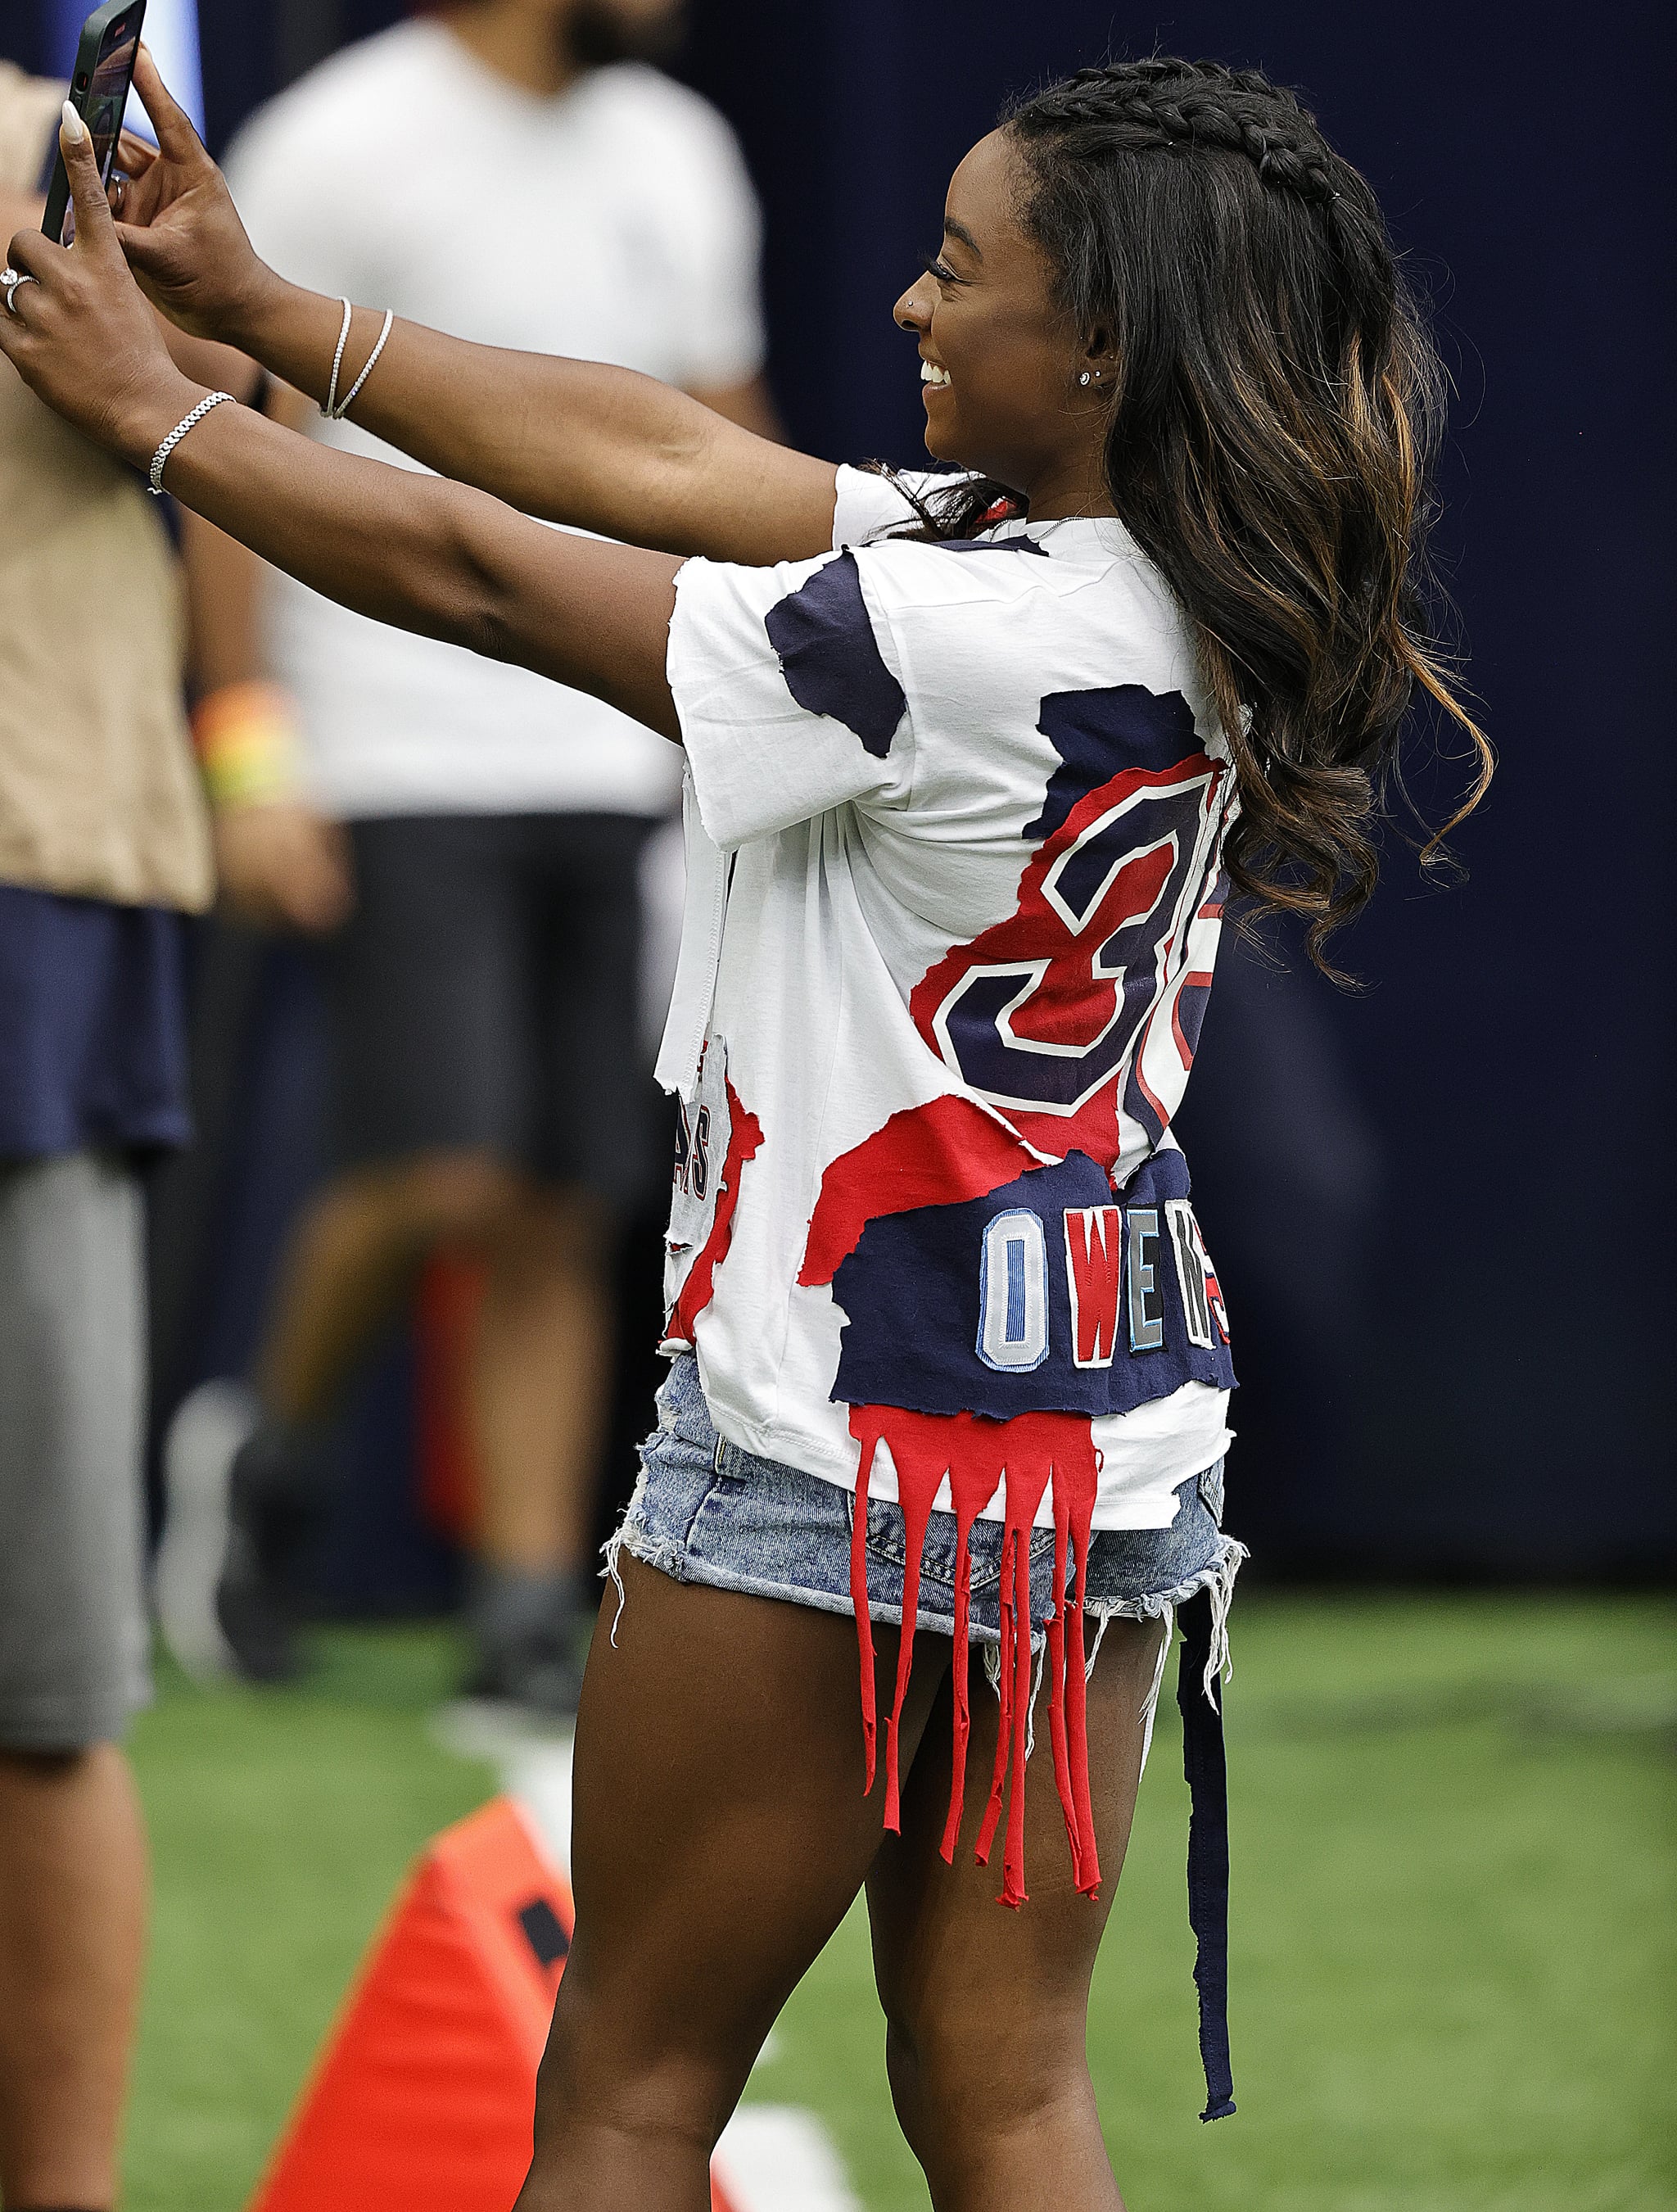 $2 Billion Brand Tailors Simone Biles an Exclusive Outfit as She Cheers for  Jonathan Owens in Recent NFL Game - EssentiallySports